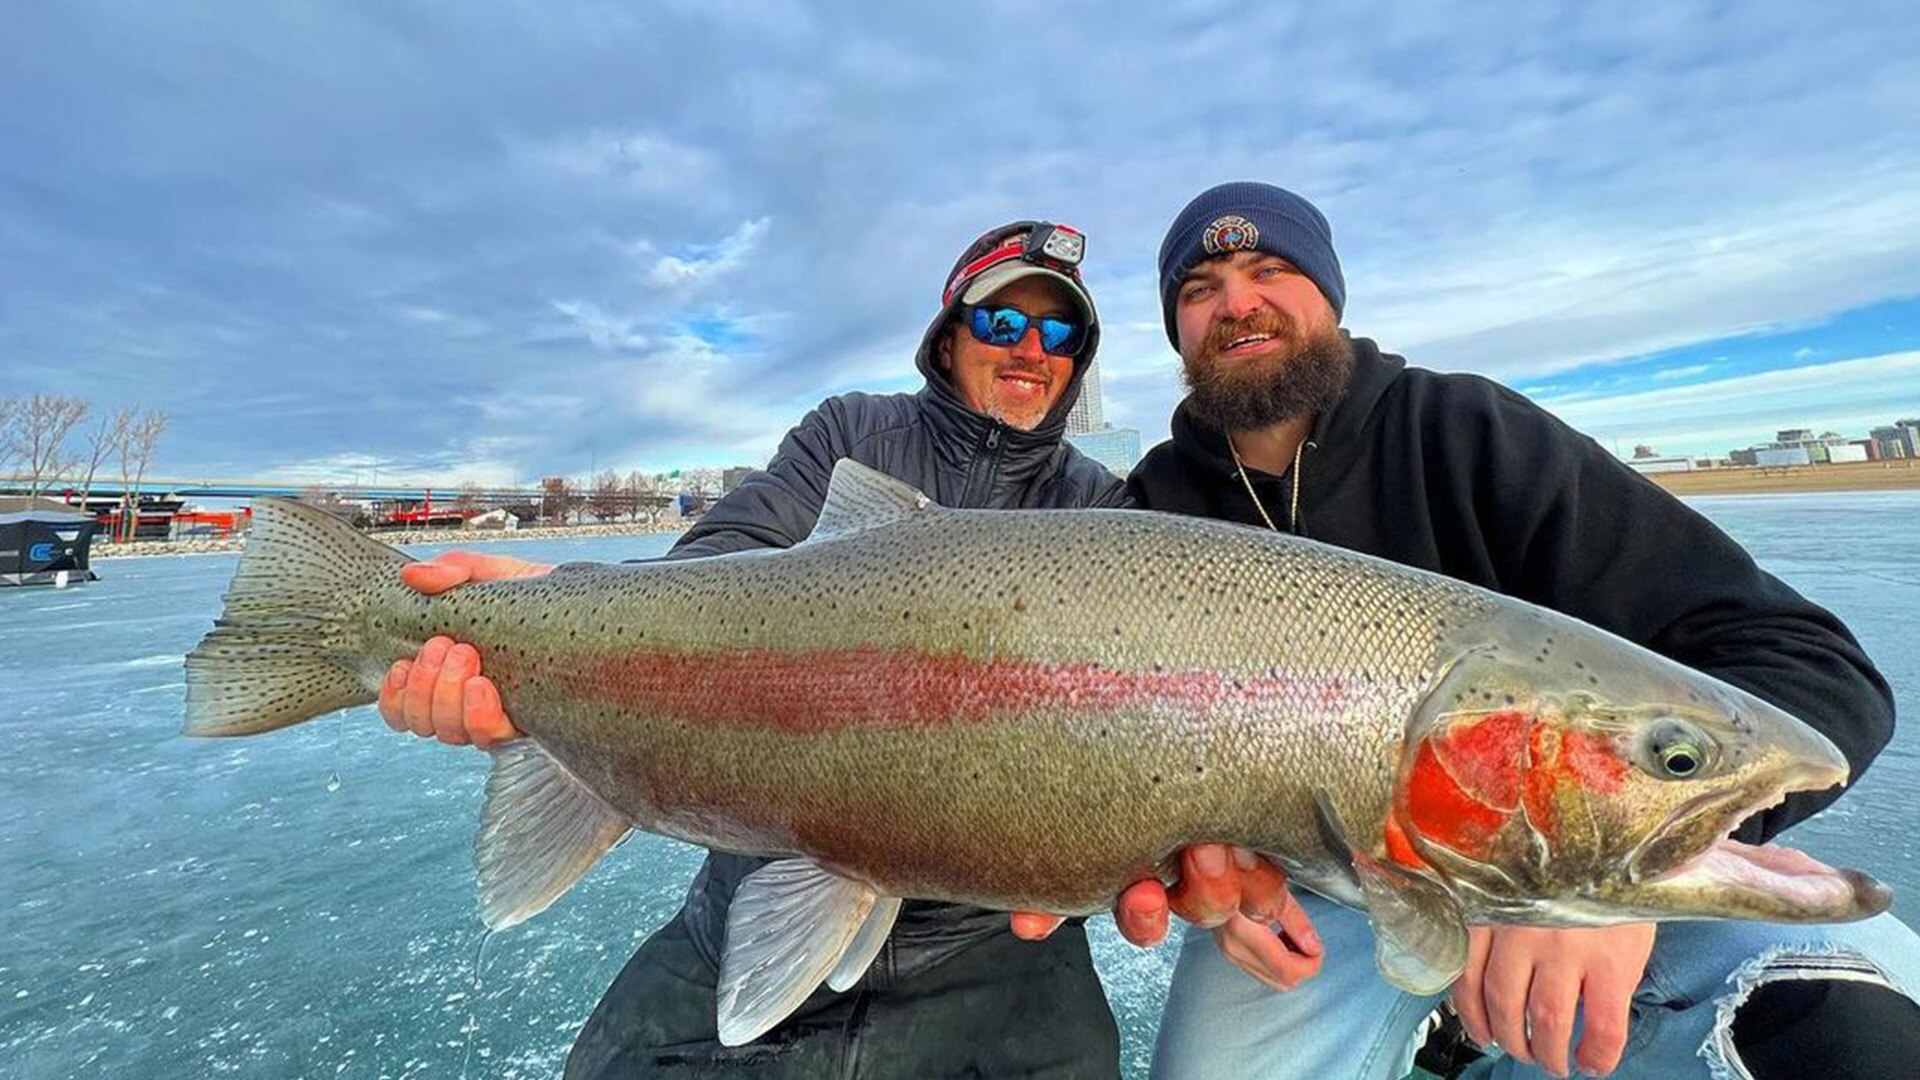 Alumacraft ambassador Eric Haataja and his friend showing their catch from their aluminum fishing boat